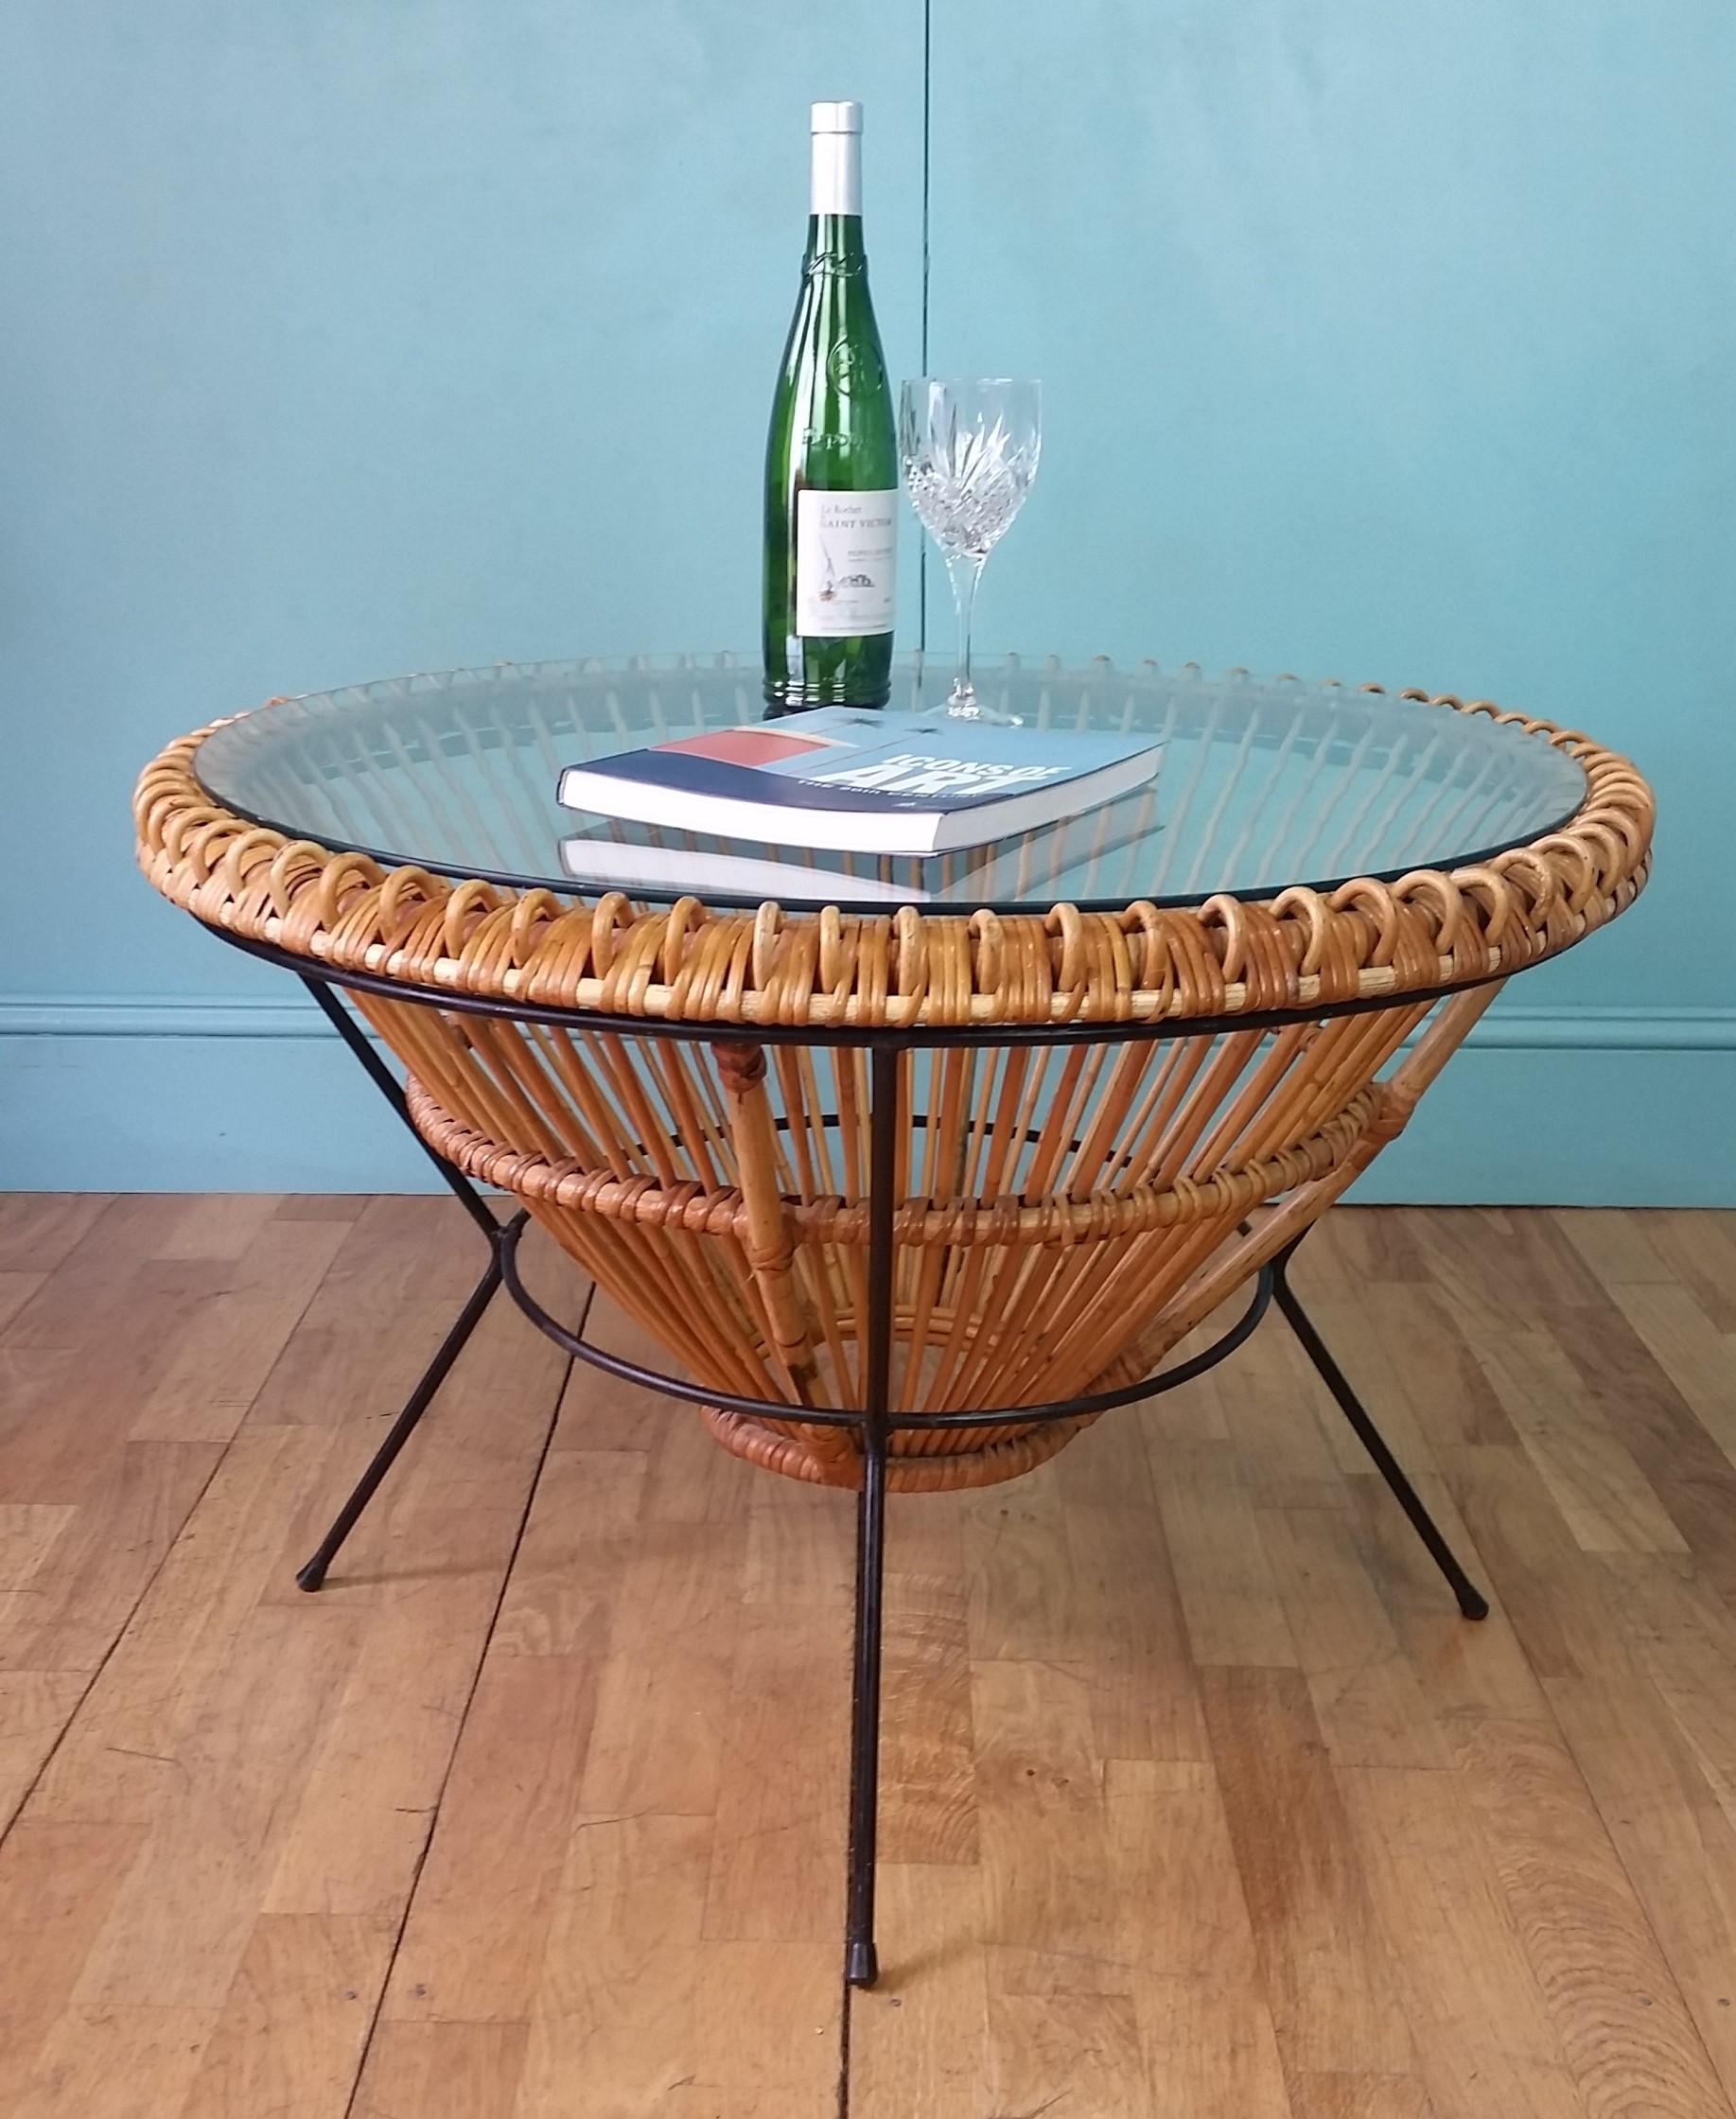 Varnished Franco Albini Rattan Coffee Table, 1960's For Sale